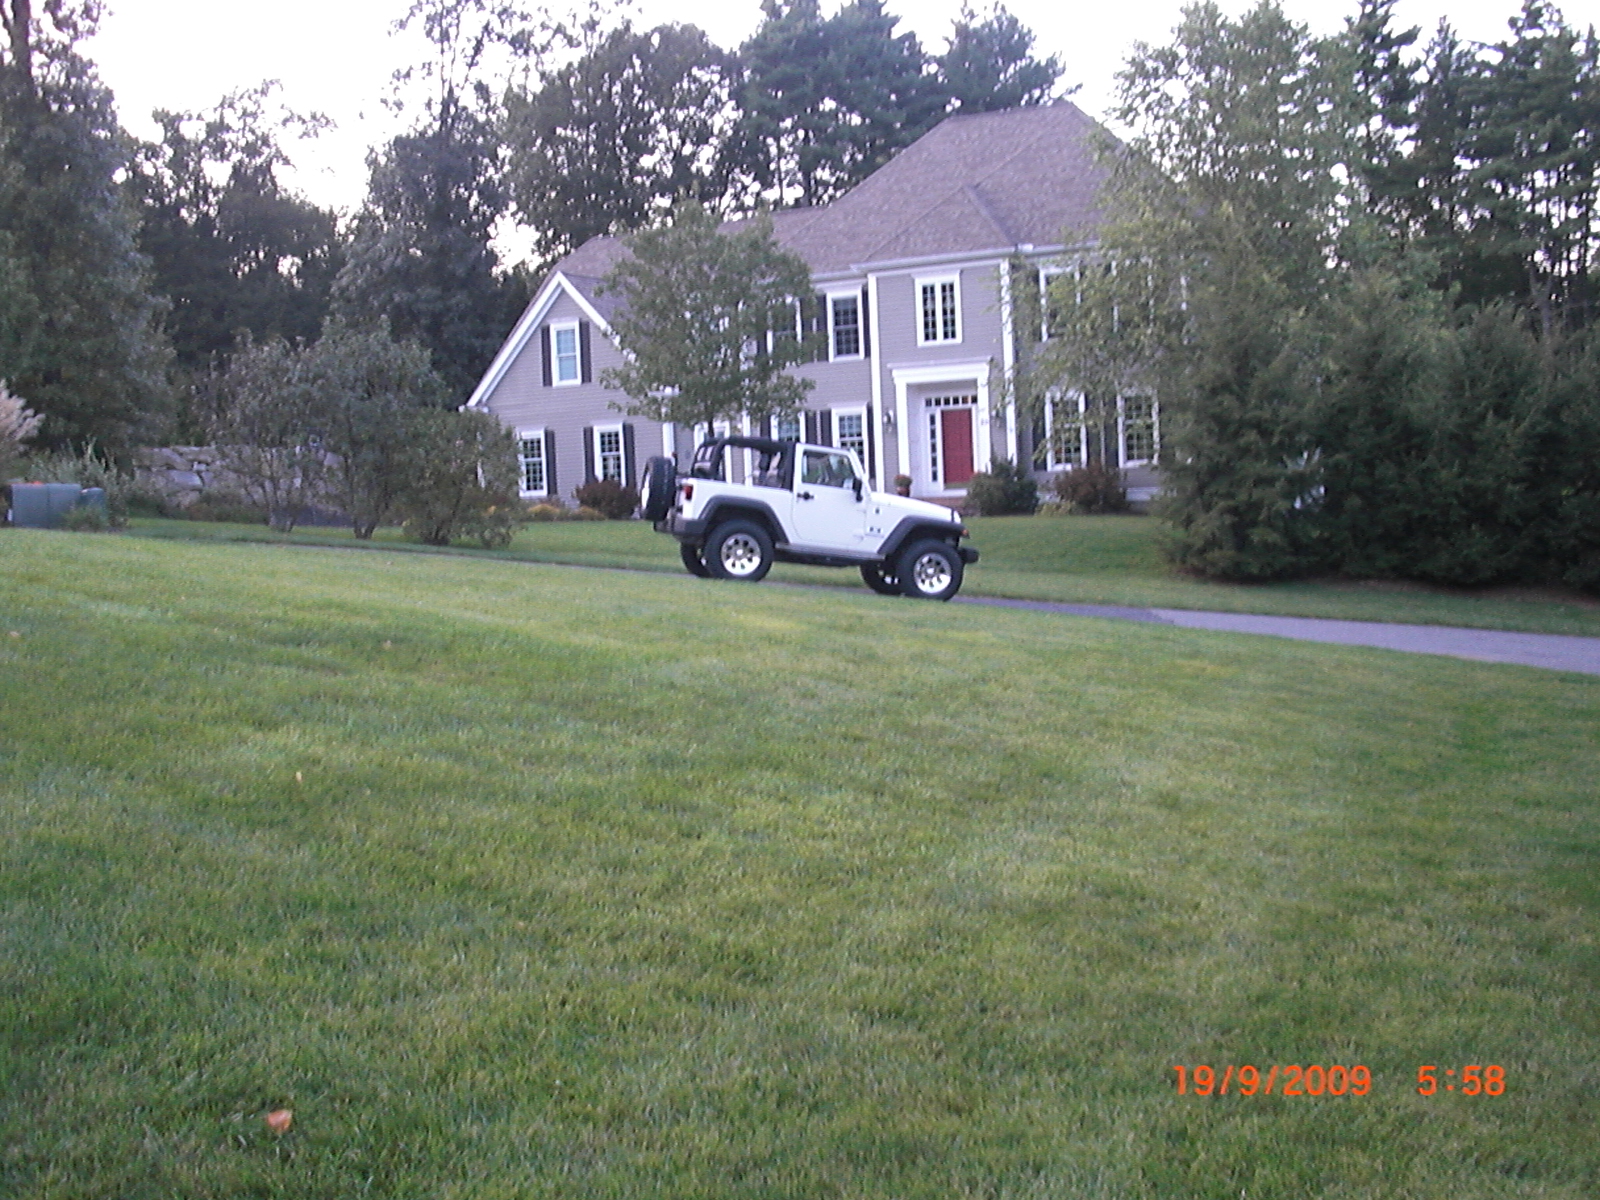 First Jeep in the driveway - Nice!